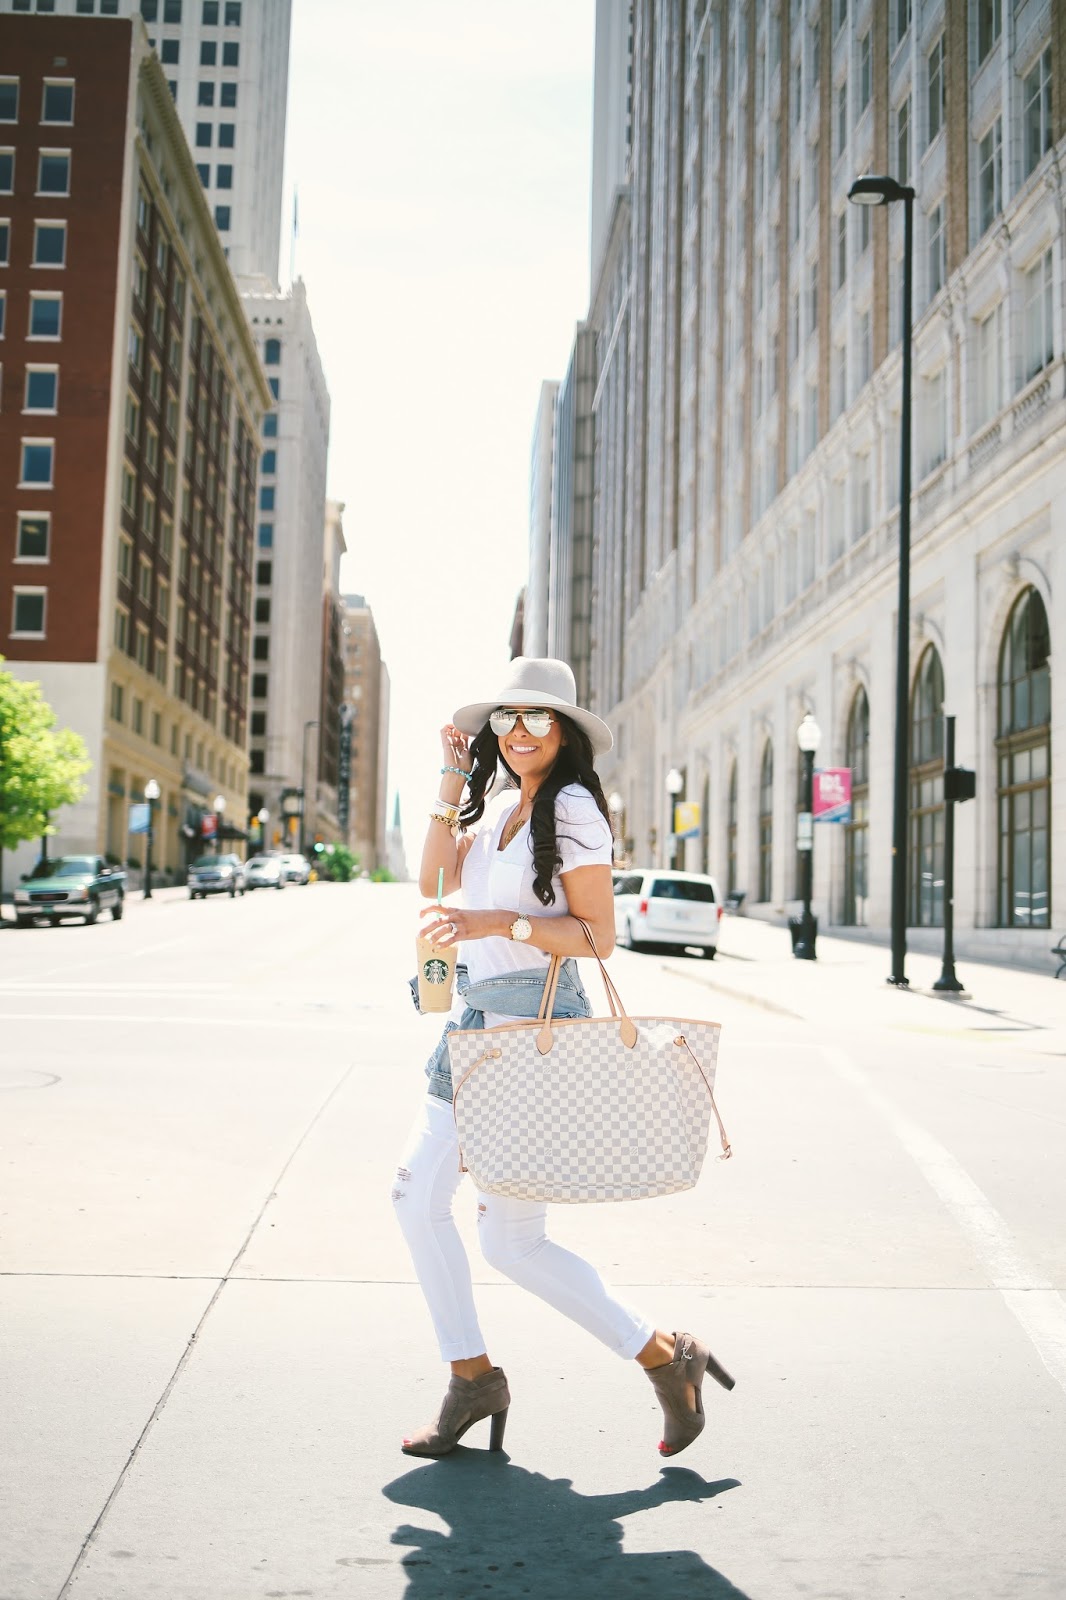 all white outfits for spring and summer, louis vuitton neverful damier azur, j brand white distressed denim, white tee made well, janessa leone grey hat, summer fashion pinterest, spring fashion pinterest, outfit idea summer pinterest, tulsa fashion blogger, downtown tulsa, vince camuto conley bootie, michele Serein watch 18mm, david yurman bracelet stack, emily gemma, the sweetest thing blog, celine mirrored aviators